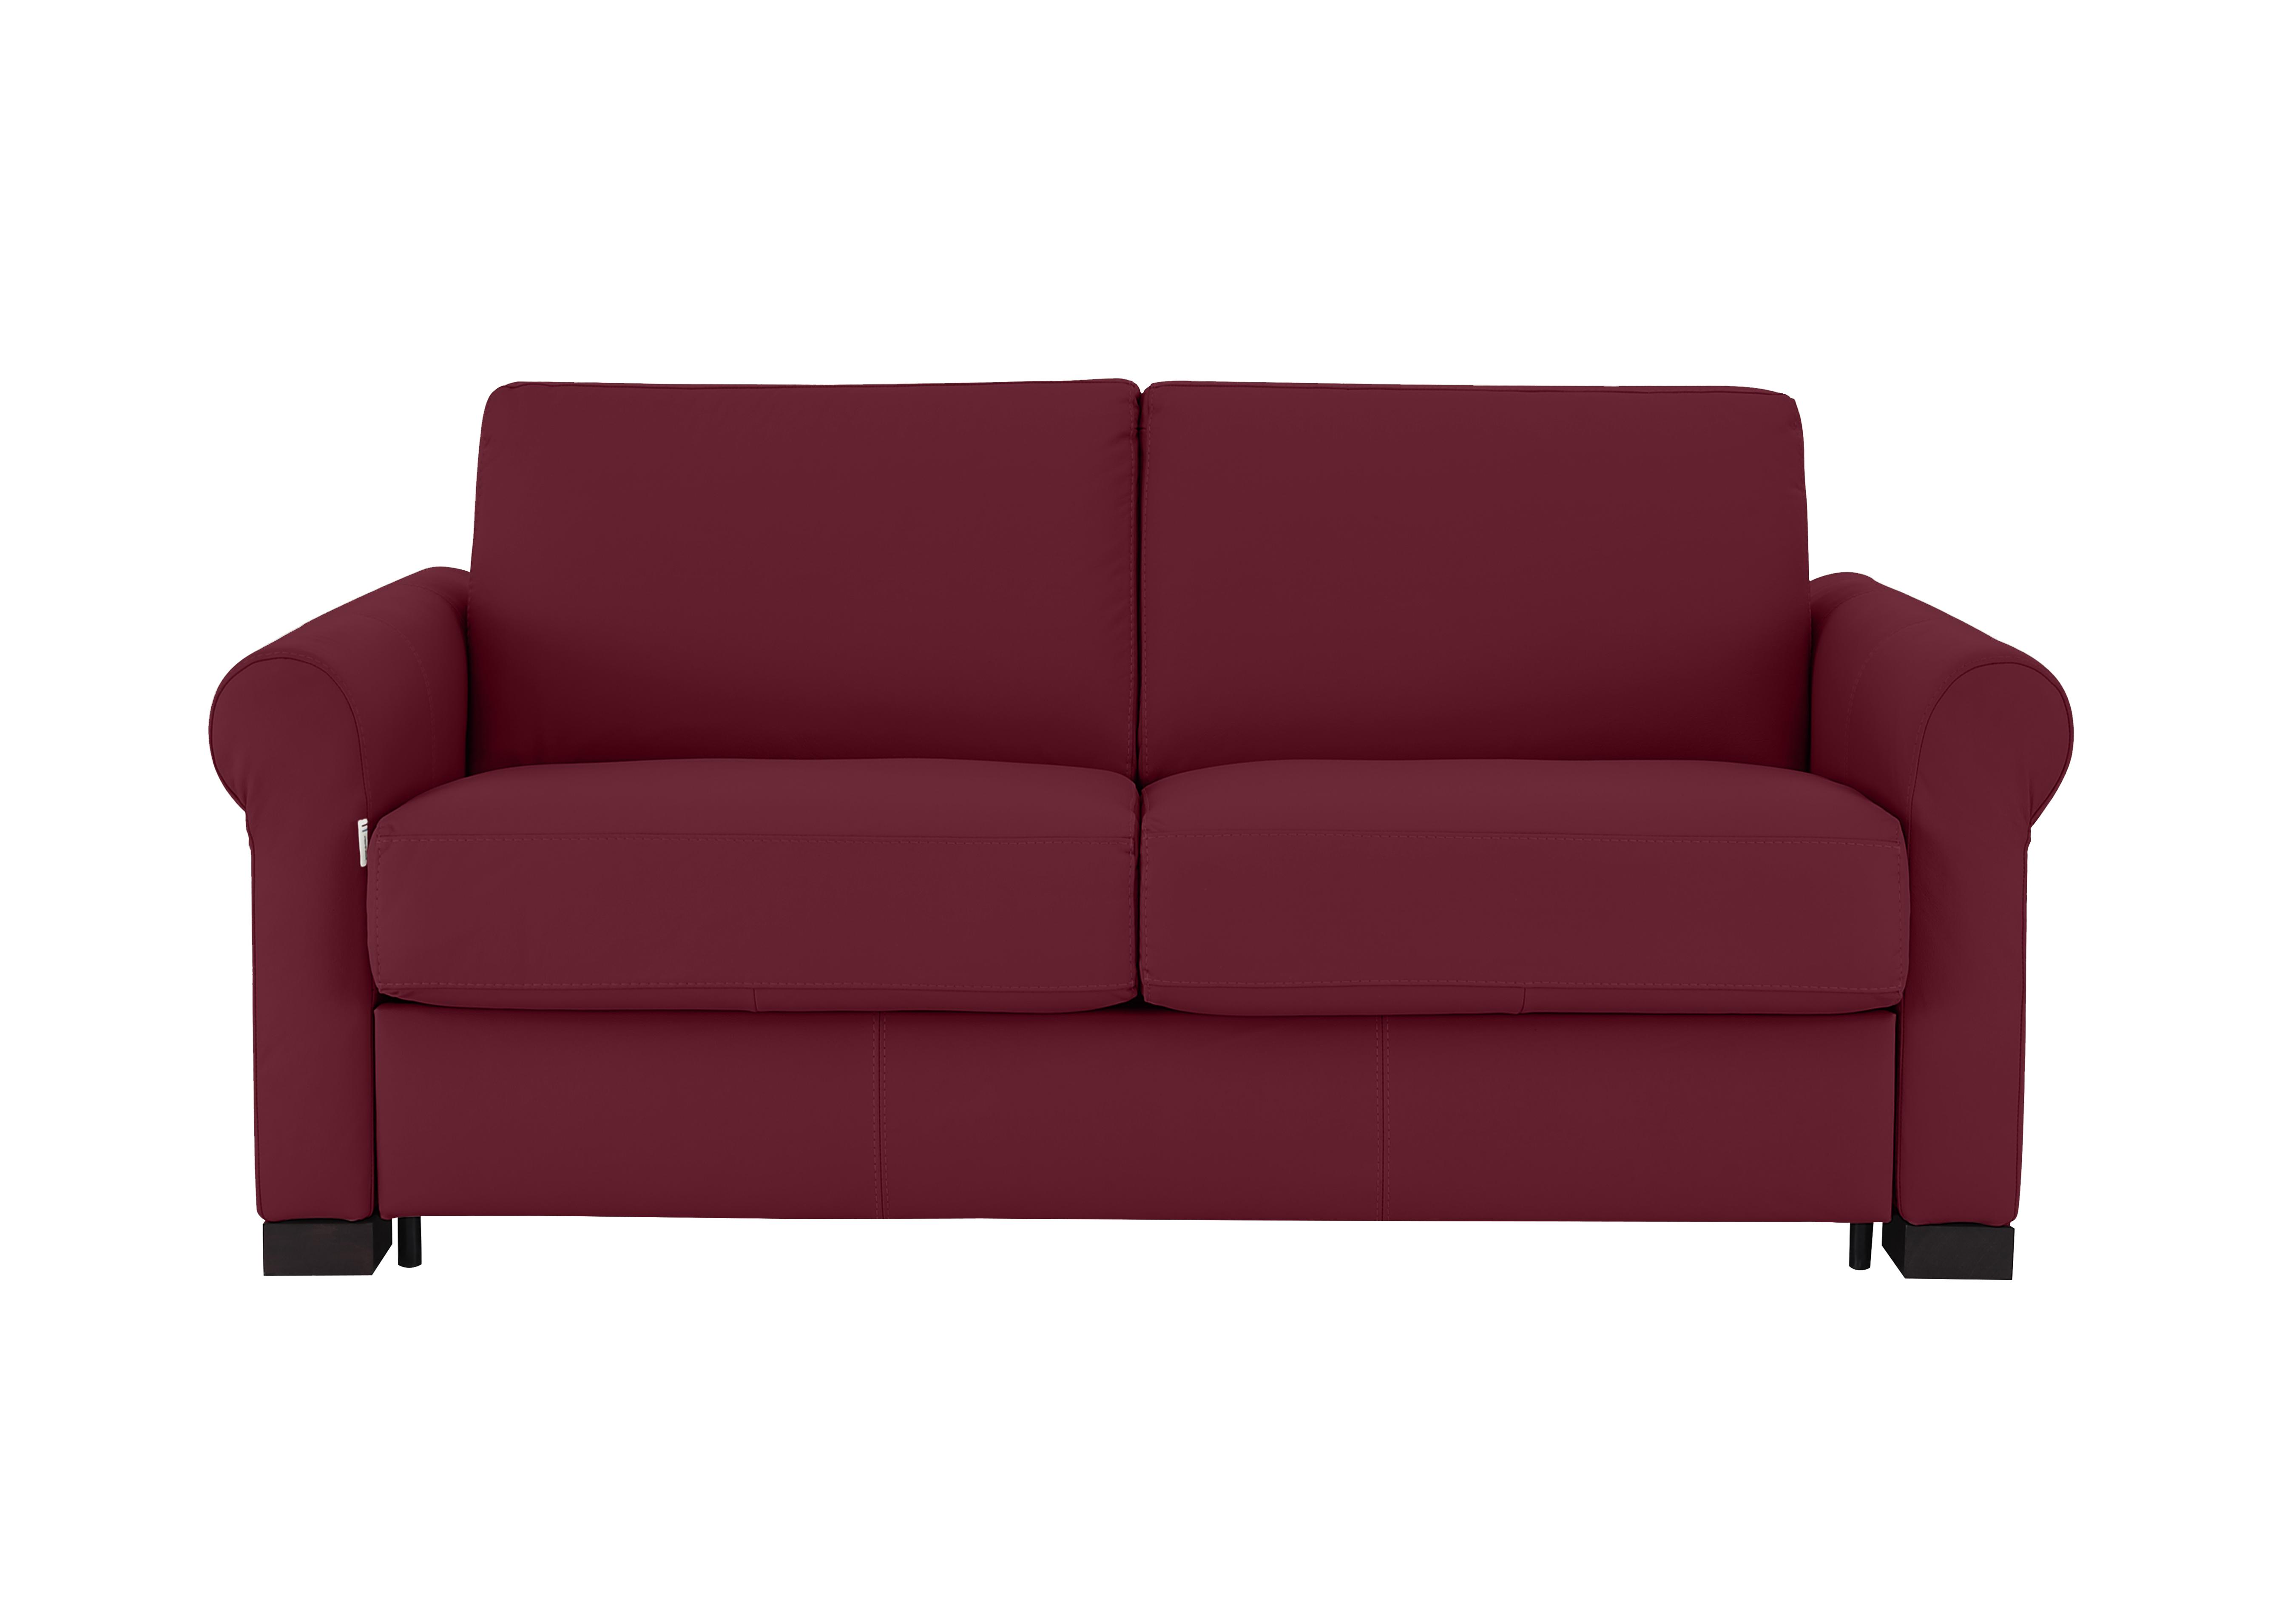 Alcova 2 Seater Leather Sofa Bed with Scroll Arms in Dali Bordeaux 1521 on Furniture Village